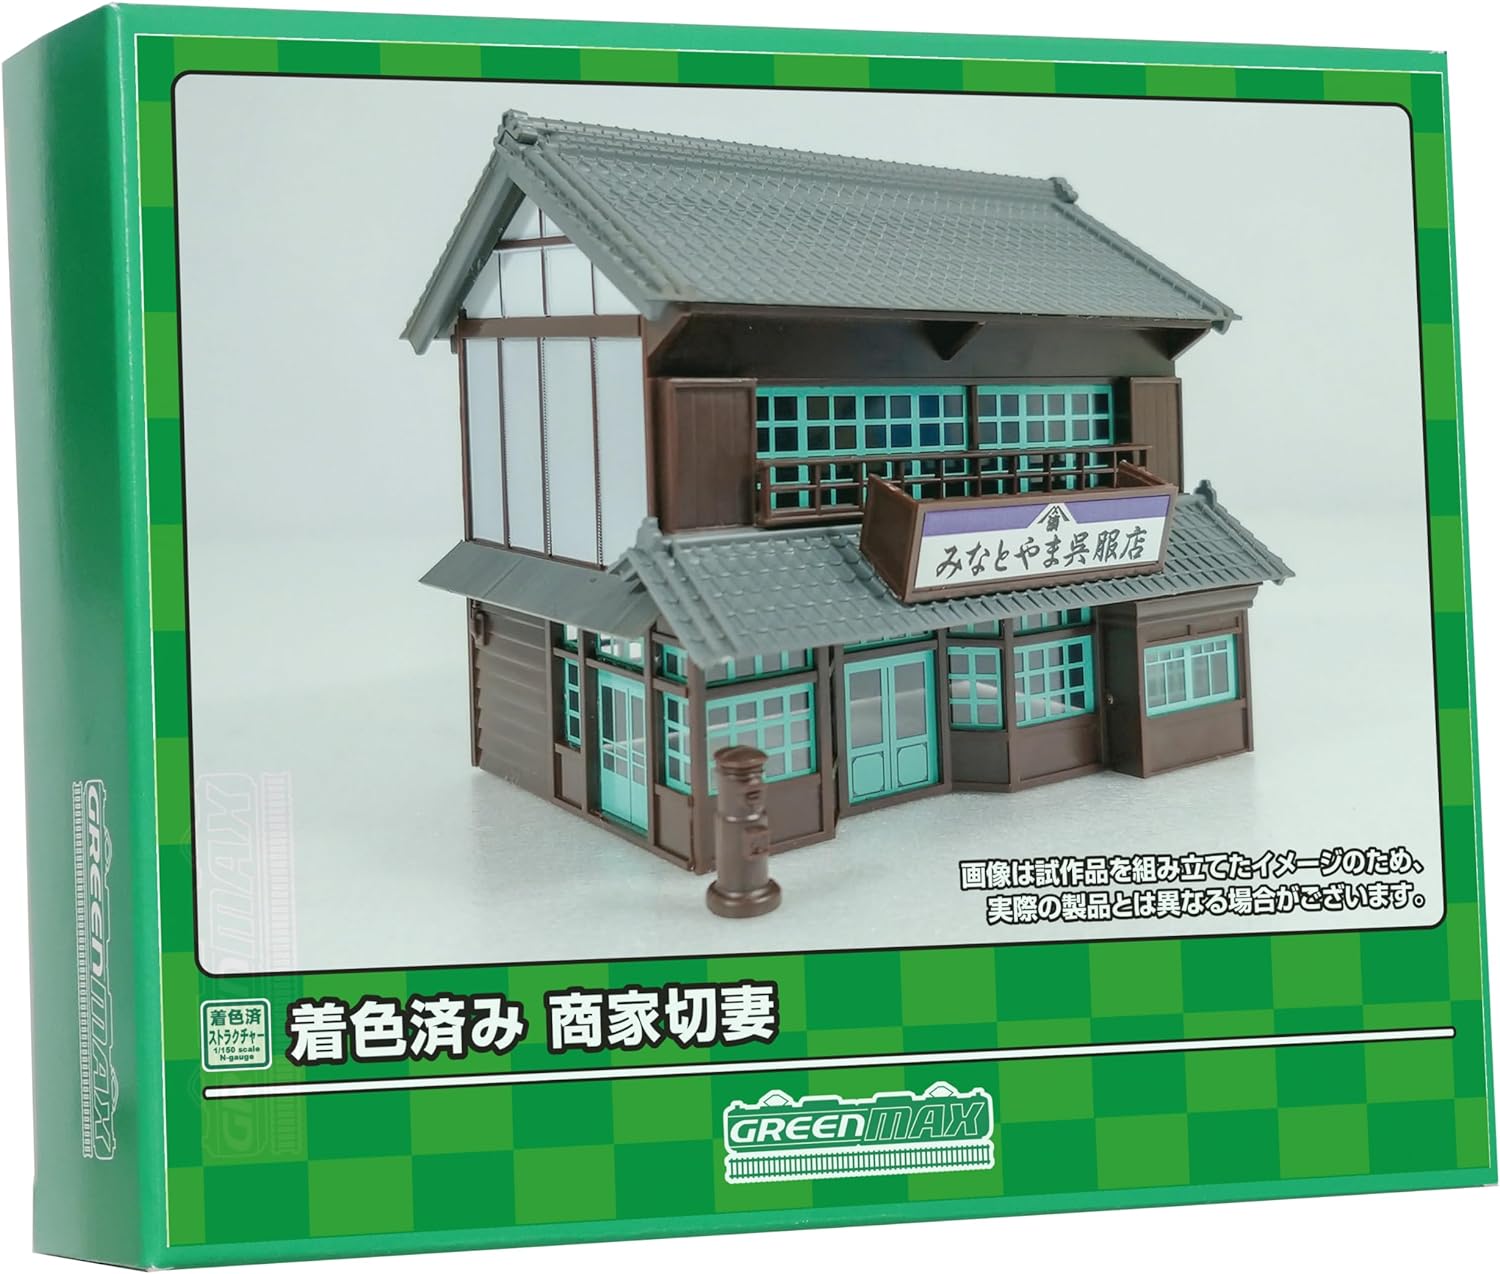 Greenmax N Gauge Colored Merchant Gable 2639 Railroad Model Structure